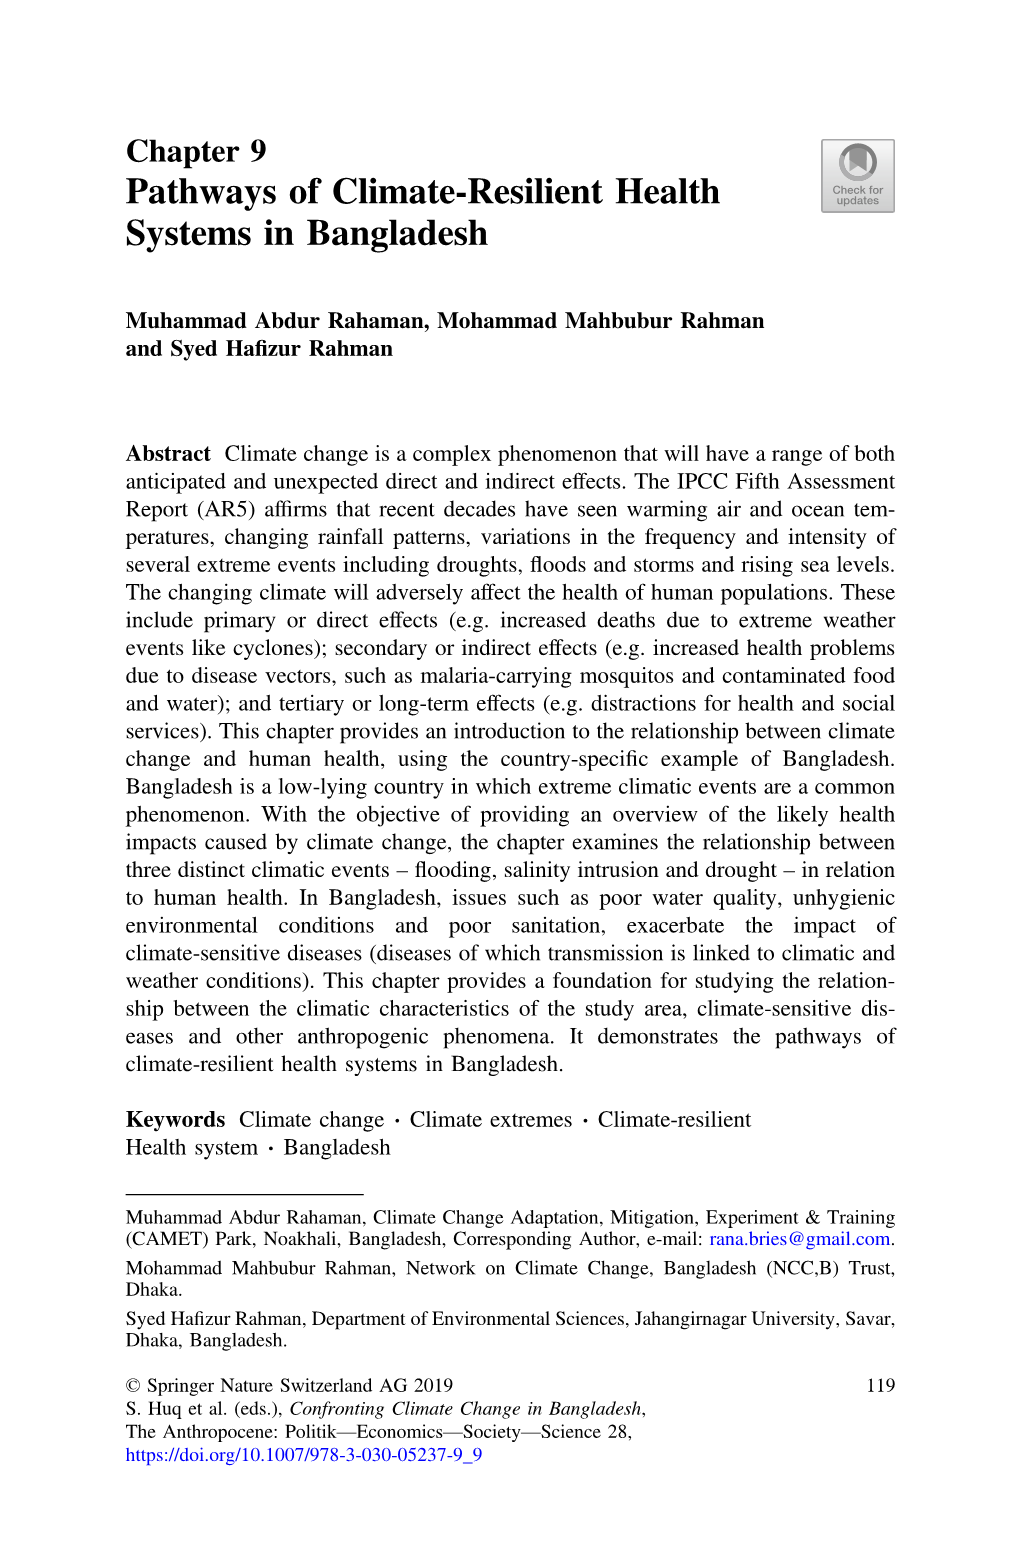 2. Pathways of Climate-Resilient Health Systems in Bangladesh